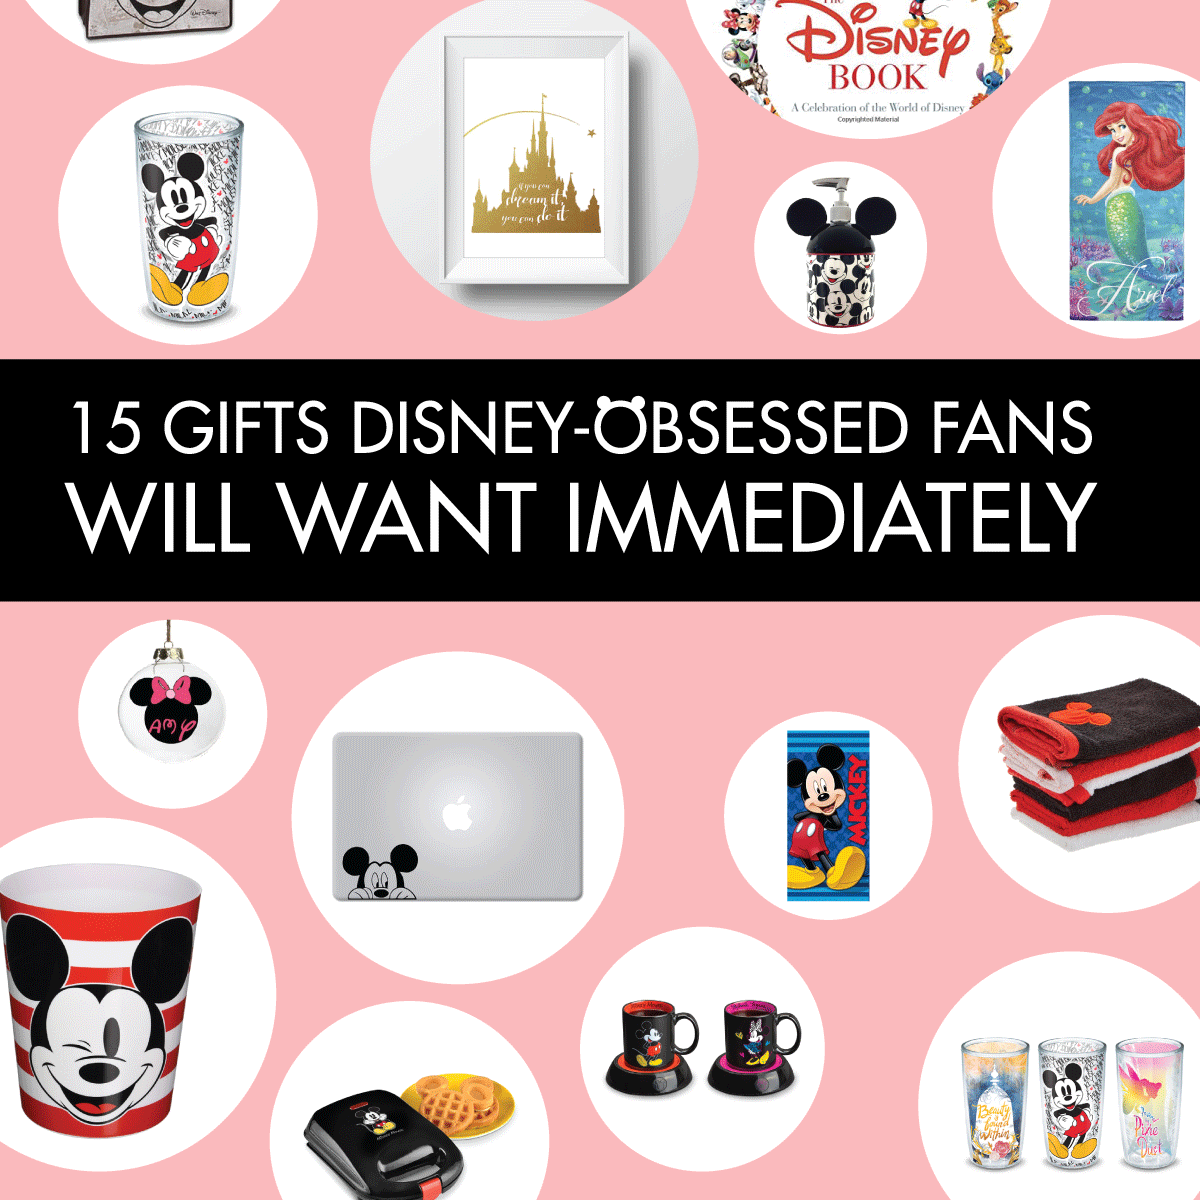 15 Gifts Disney-Obsessed Fans Will Want Immediately